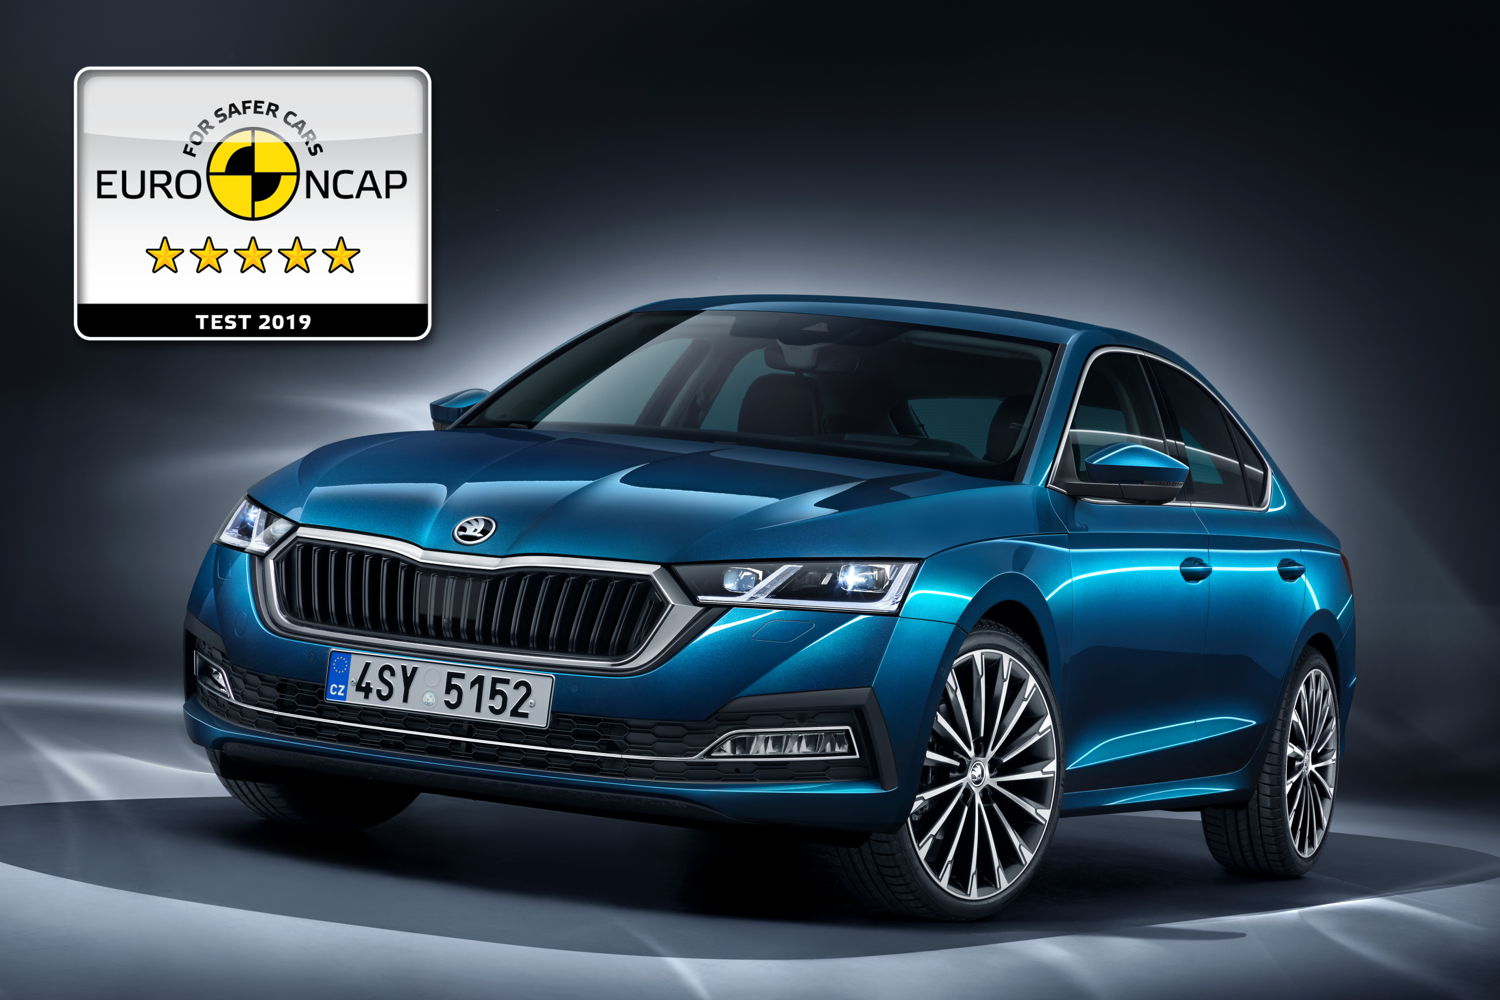 The new ŠKODA OCTAVIA’s outstanding overall result continues
the tradition of maximum scores for ŠKODA vehicles in what is the
benchmark test for crash safety, following in the footsteps of
previous five-star performers such as the KODIAQ and KAROQ
SUV models, the compact SCALA and the KAMIQ city SUV.